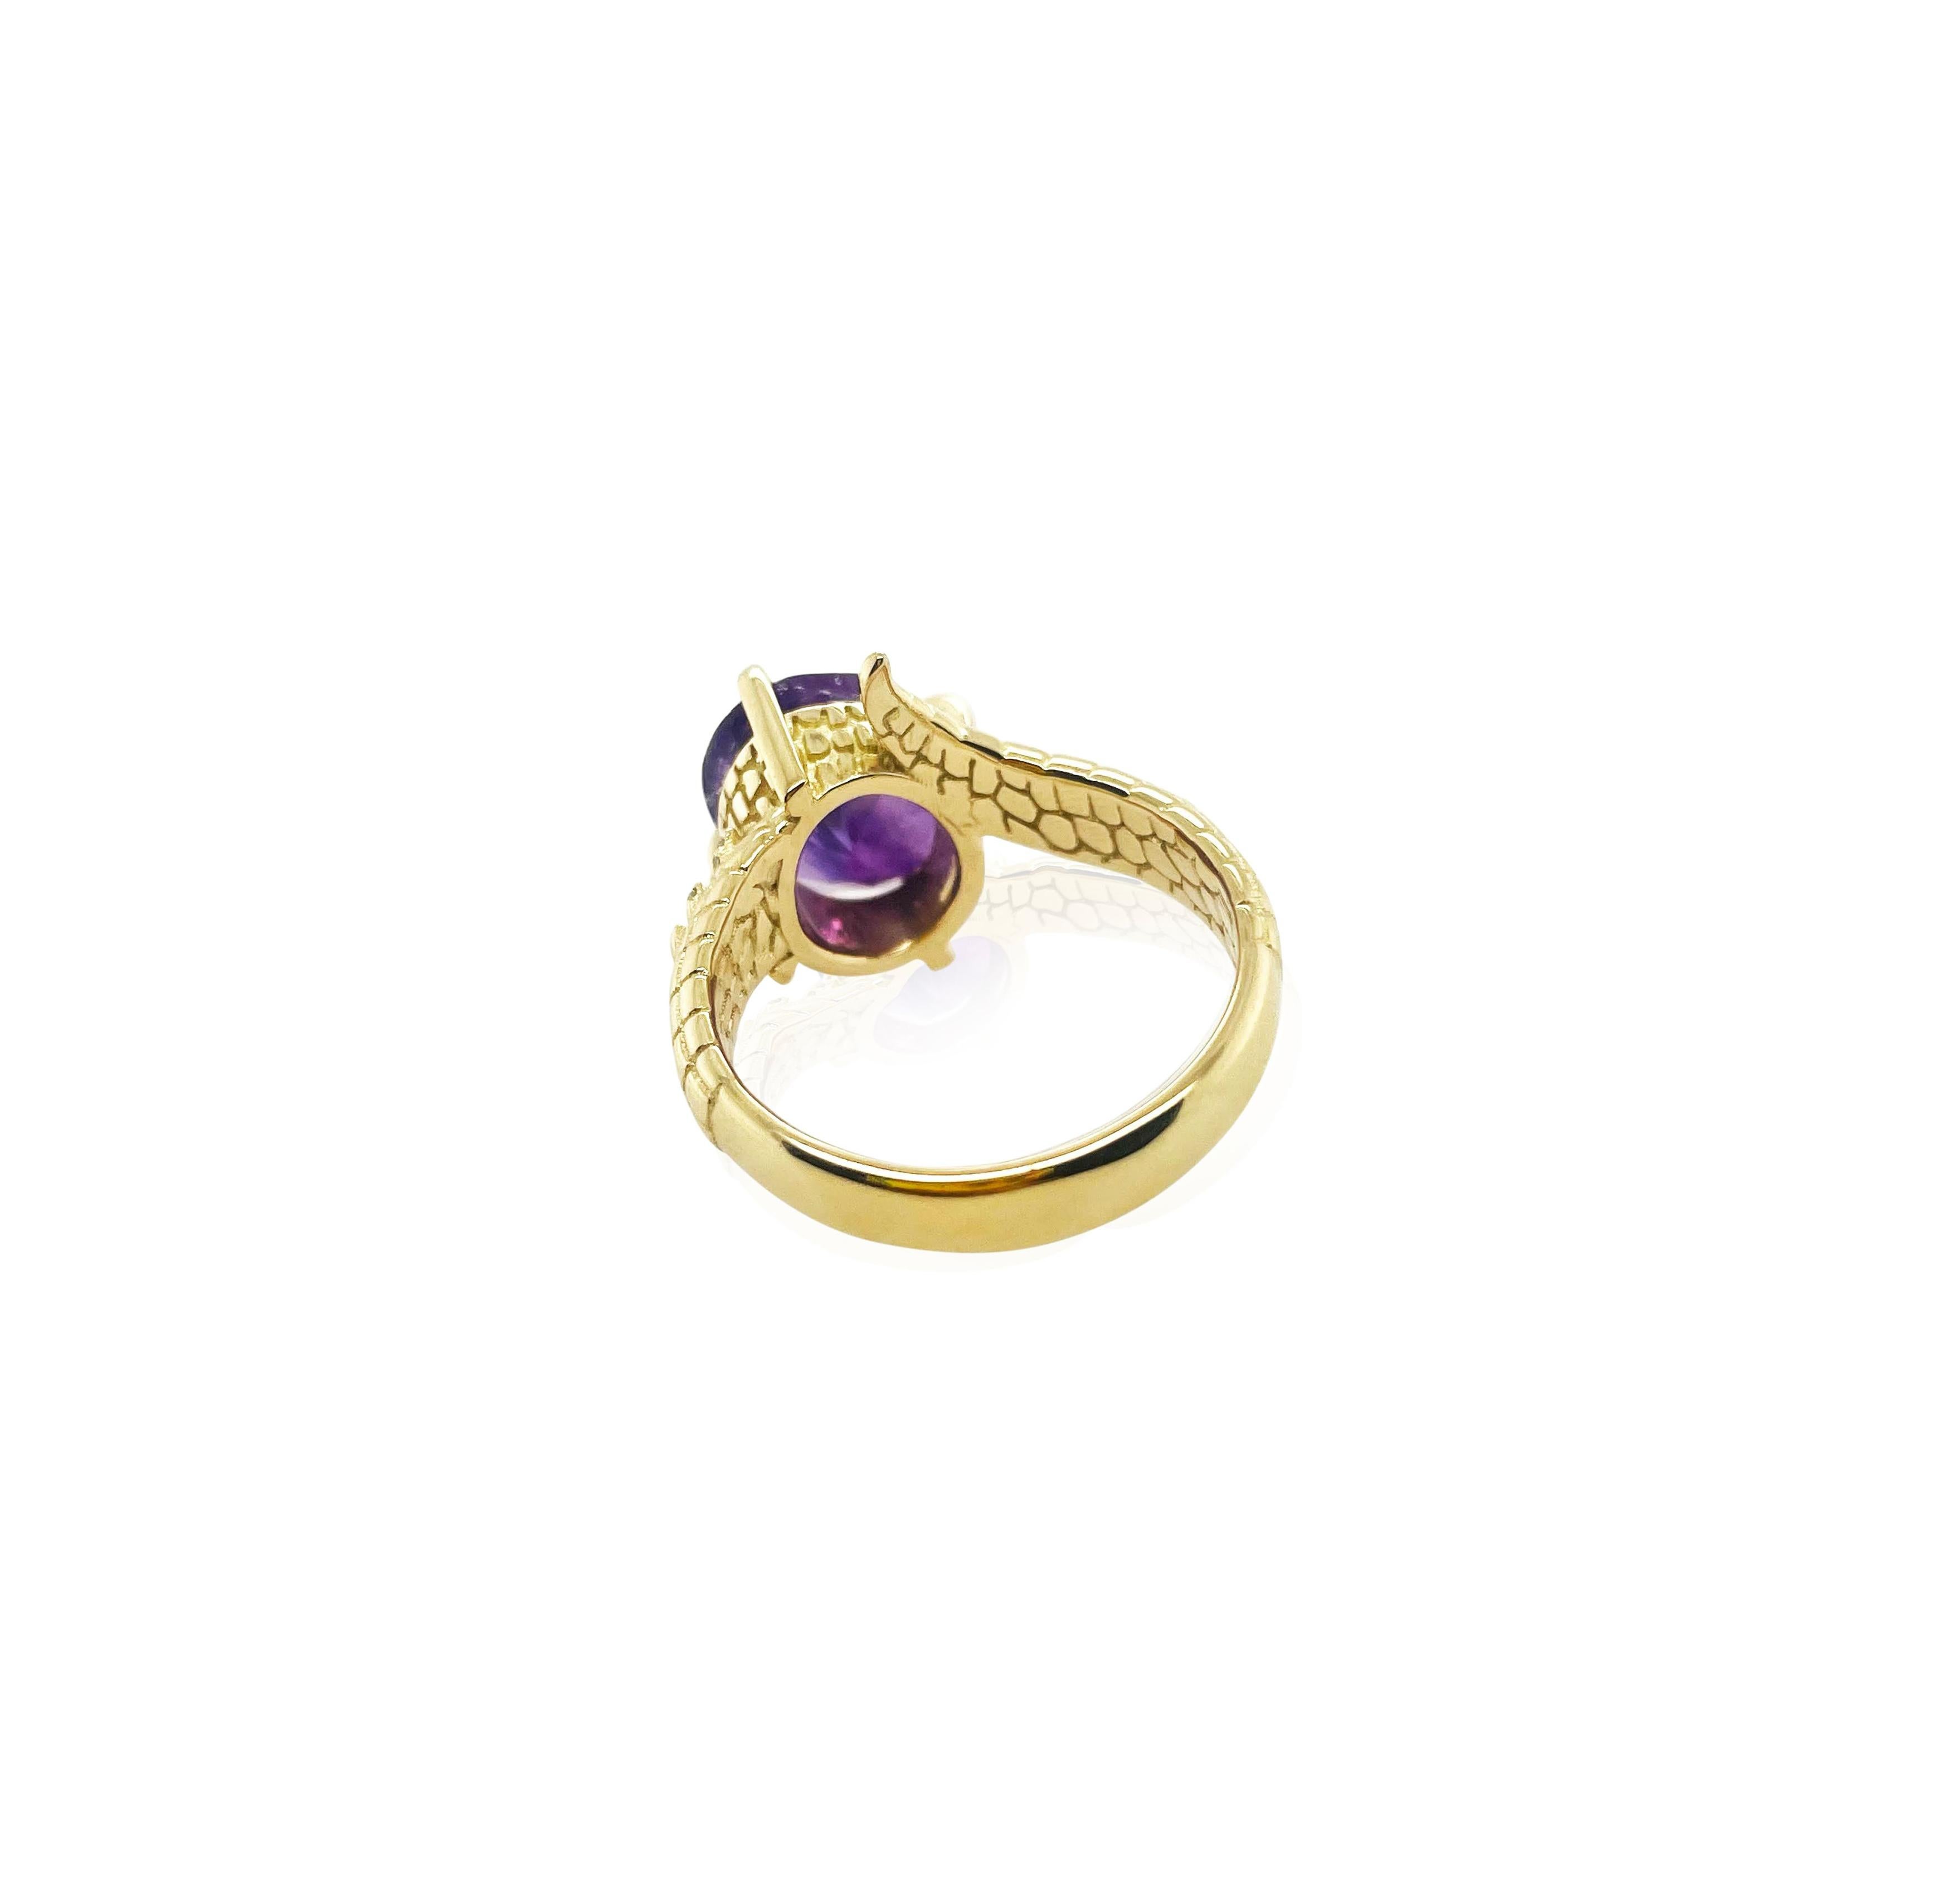 For Sale:  Croc Dragon Tail Ring with 5ct Oval Cut Amethyst with diamond spikes  2